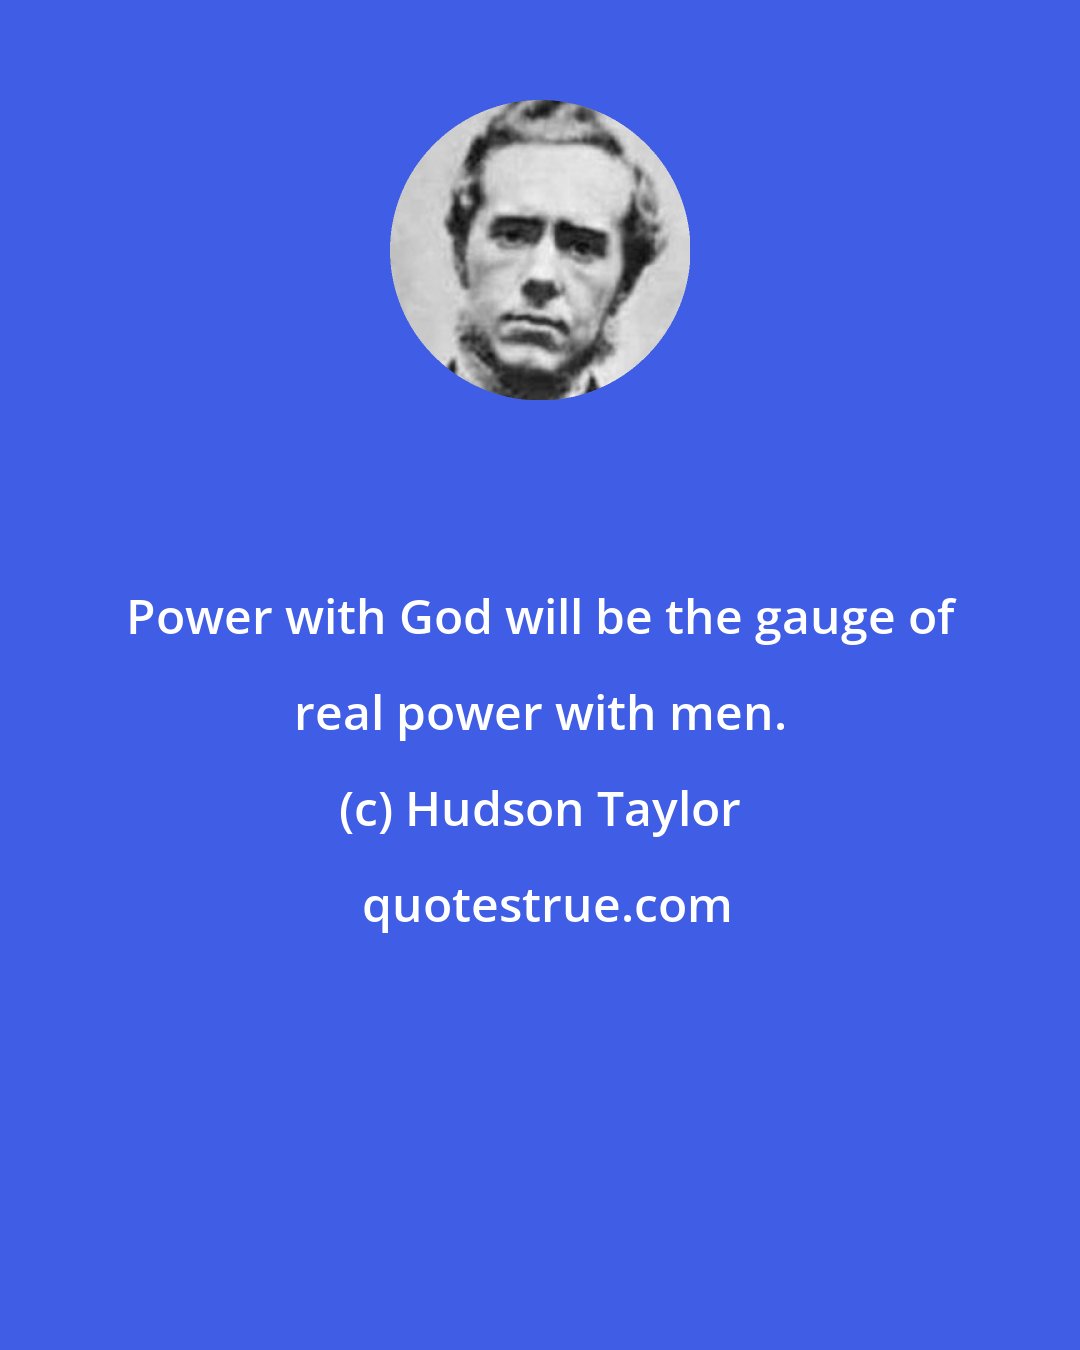 Hudson Taylor: Power with God will be the gauge of real power with men.